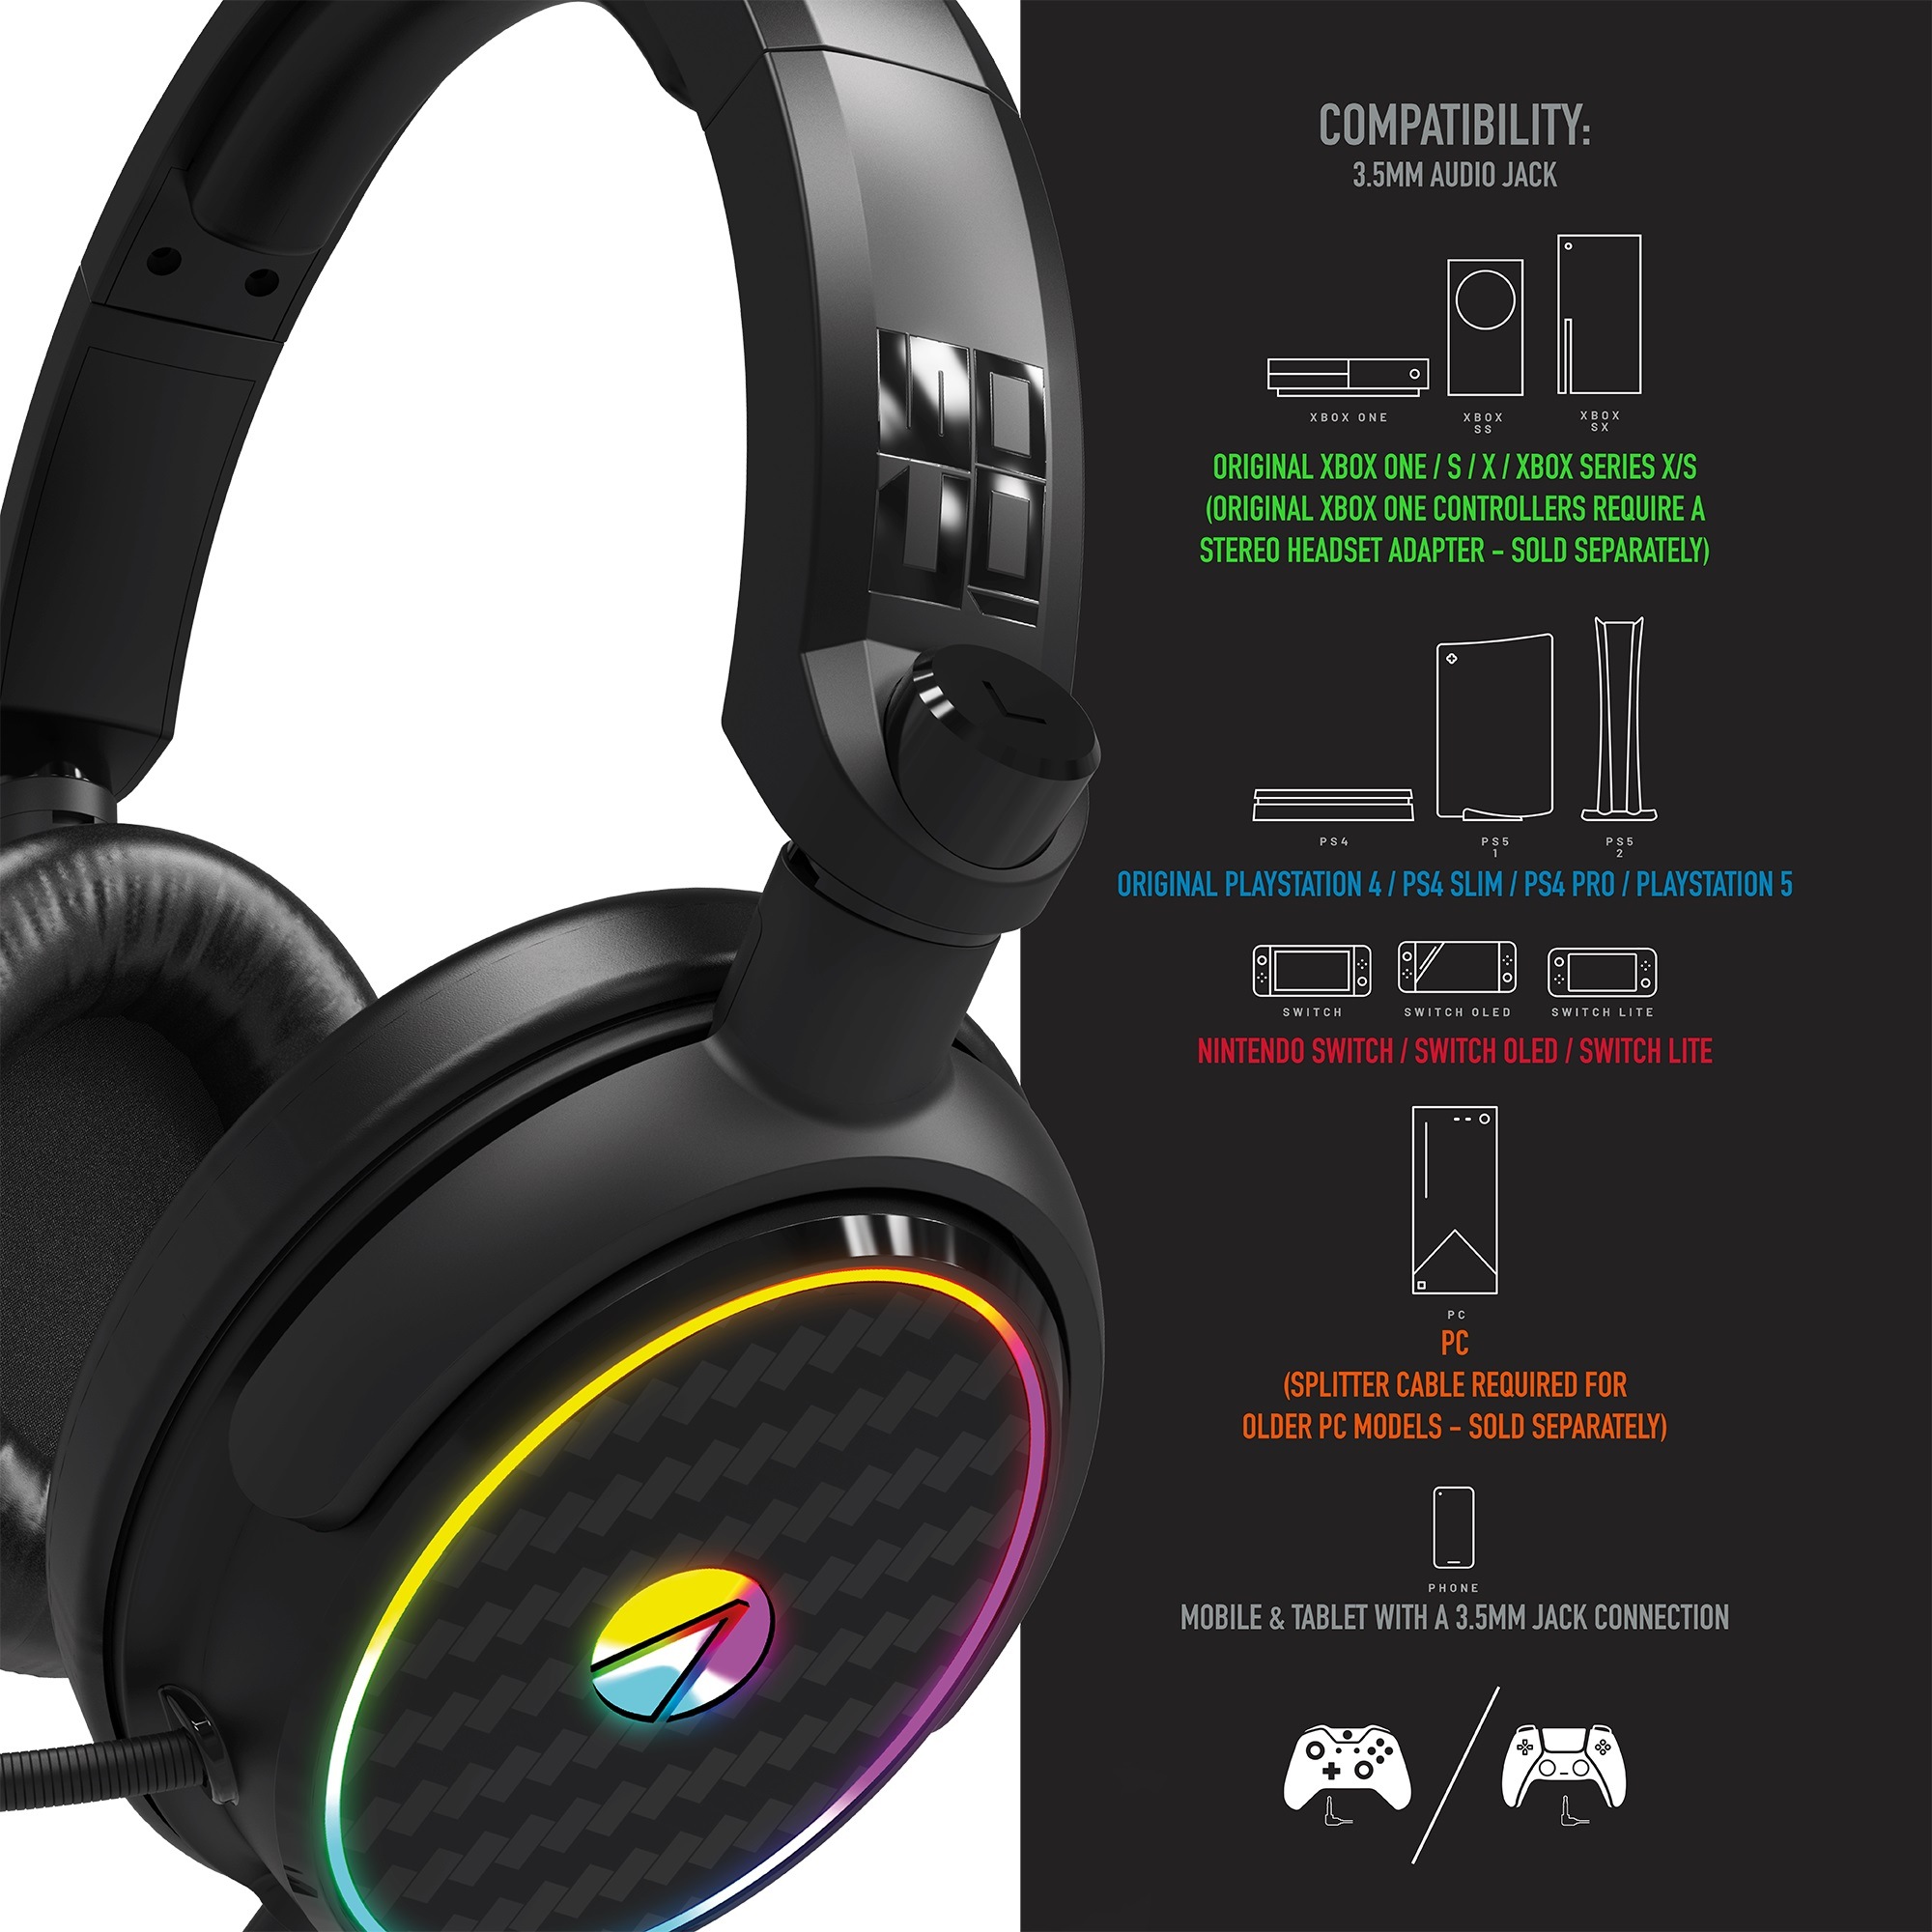 Stealth Gaming-Headset »Stereo Gaming Headset C6-100 mit LED Beleuchtung«, Plastikfreie Verpackung